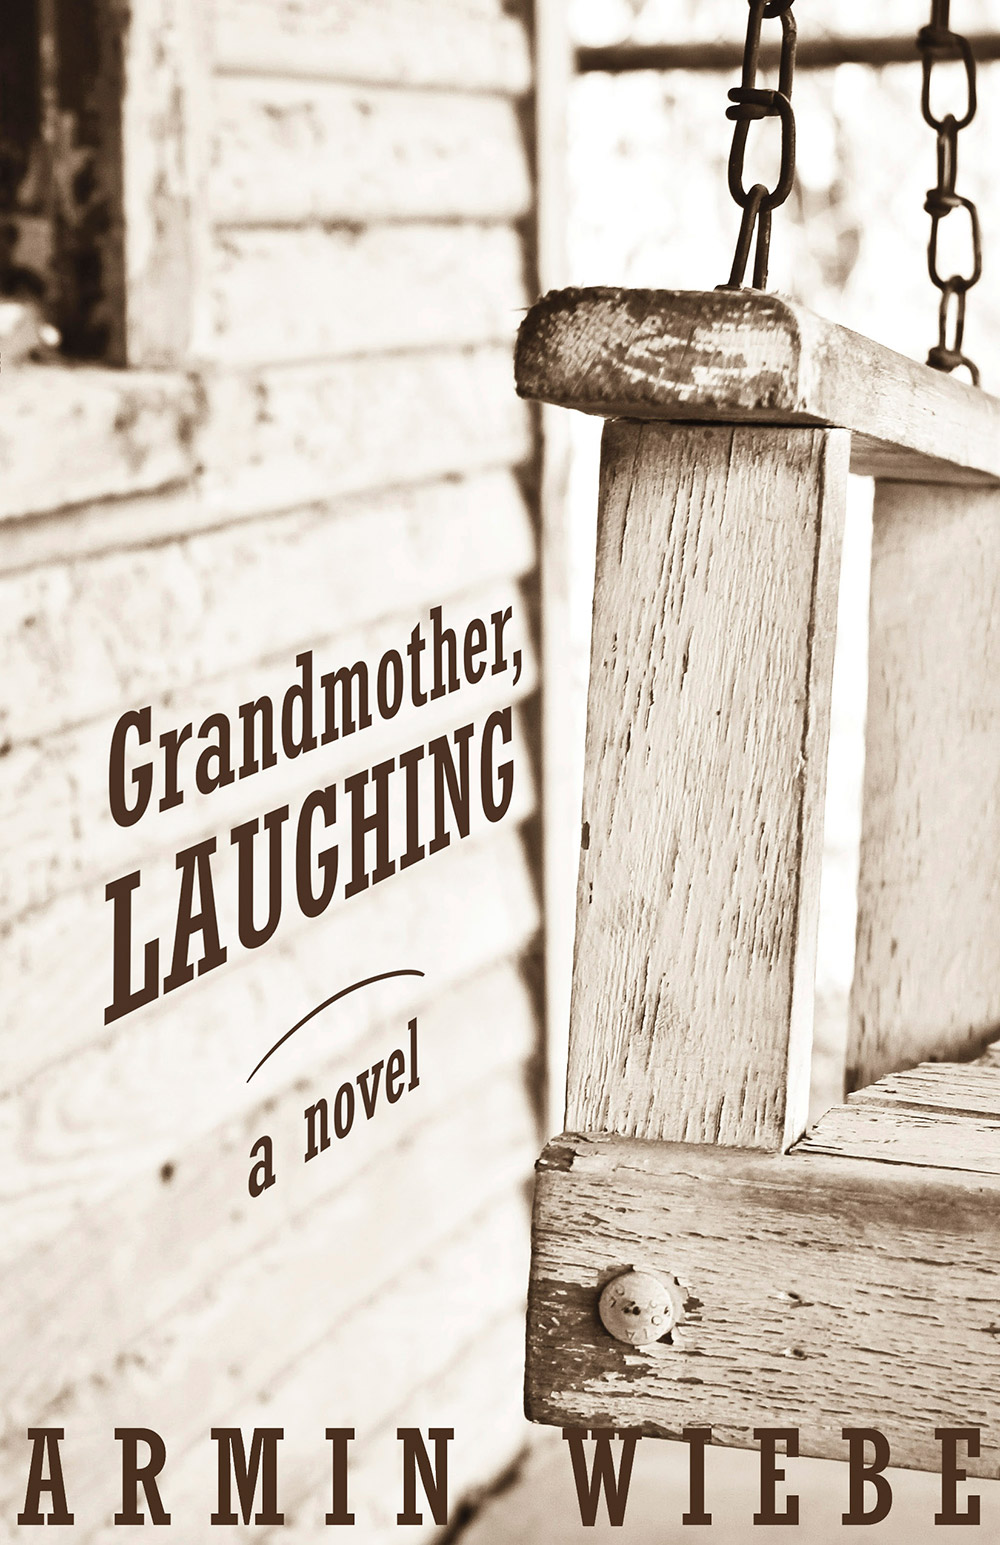 Grandmother, Laughing